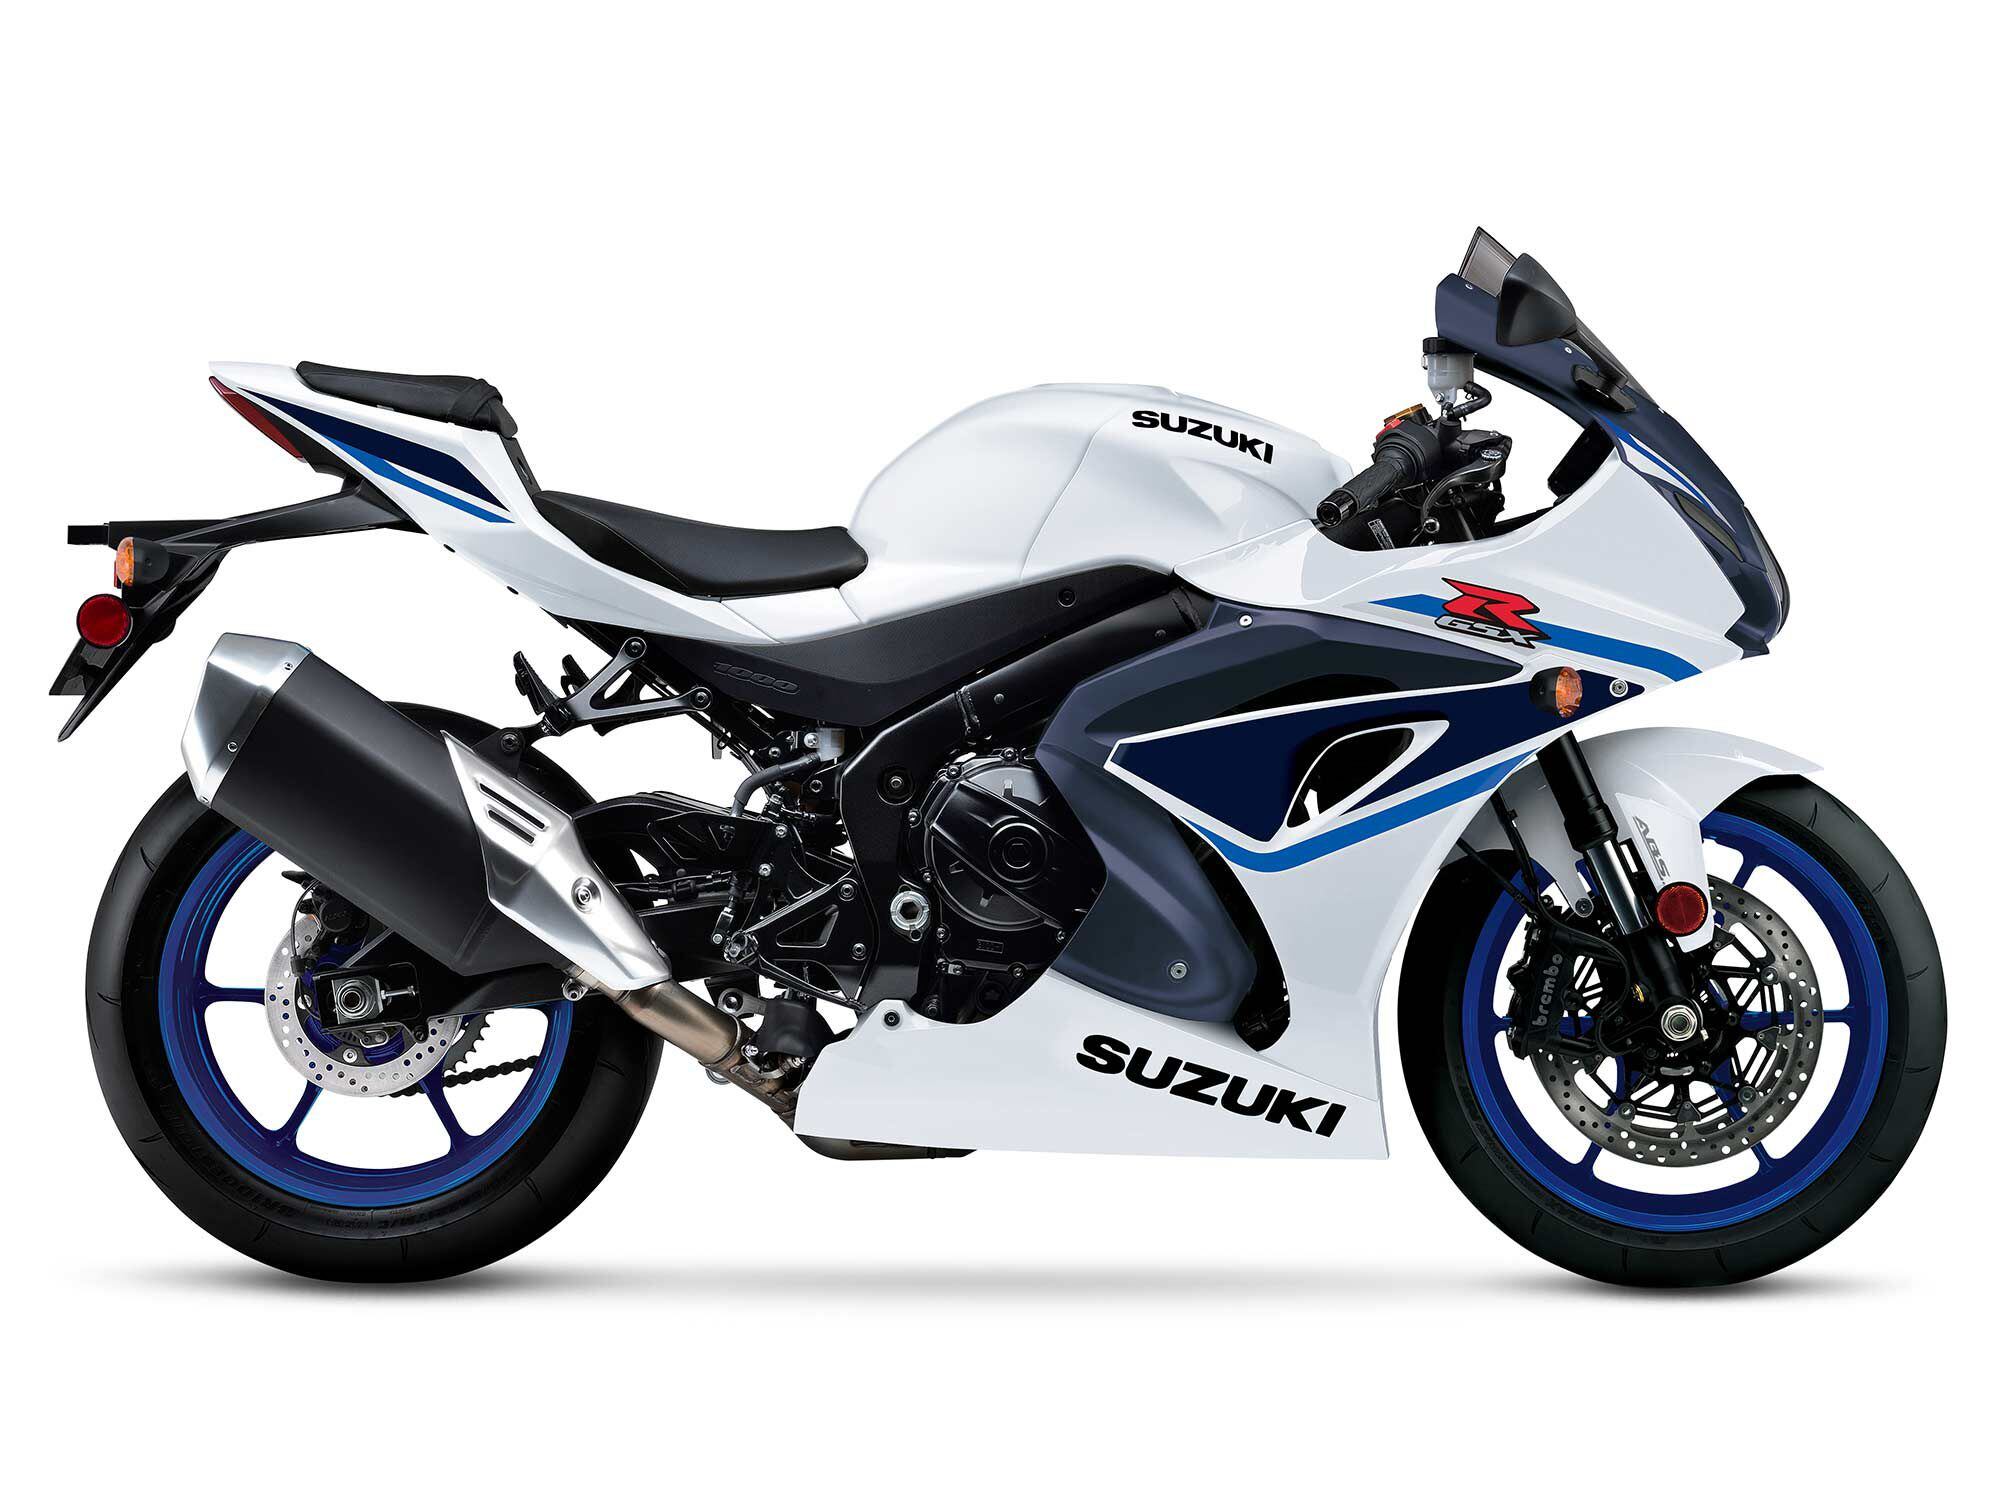 The 2023 Suzuki GSX-R1000 doesn’t get any major changes, but will come in two new colorways.